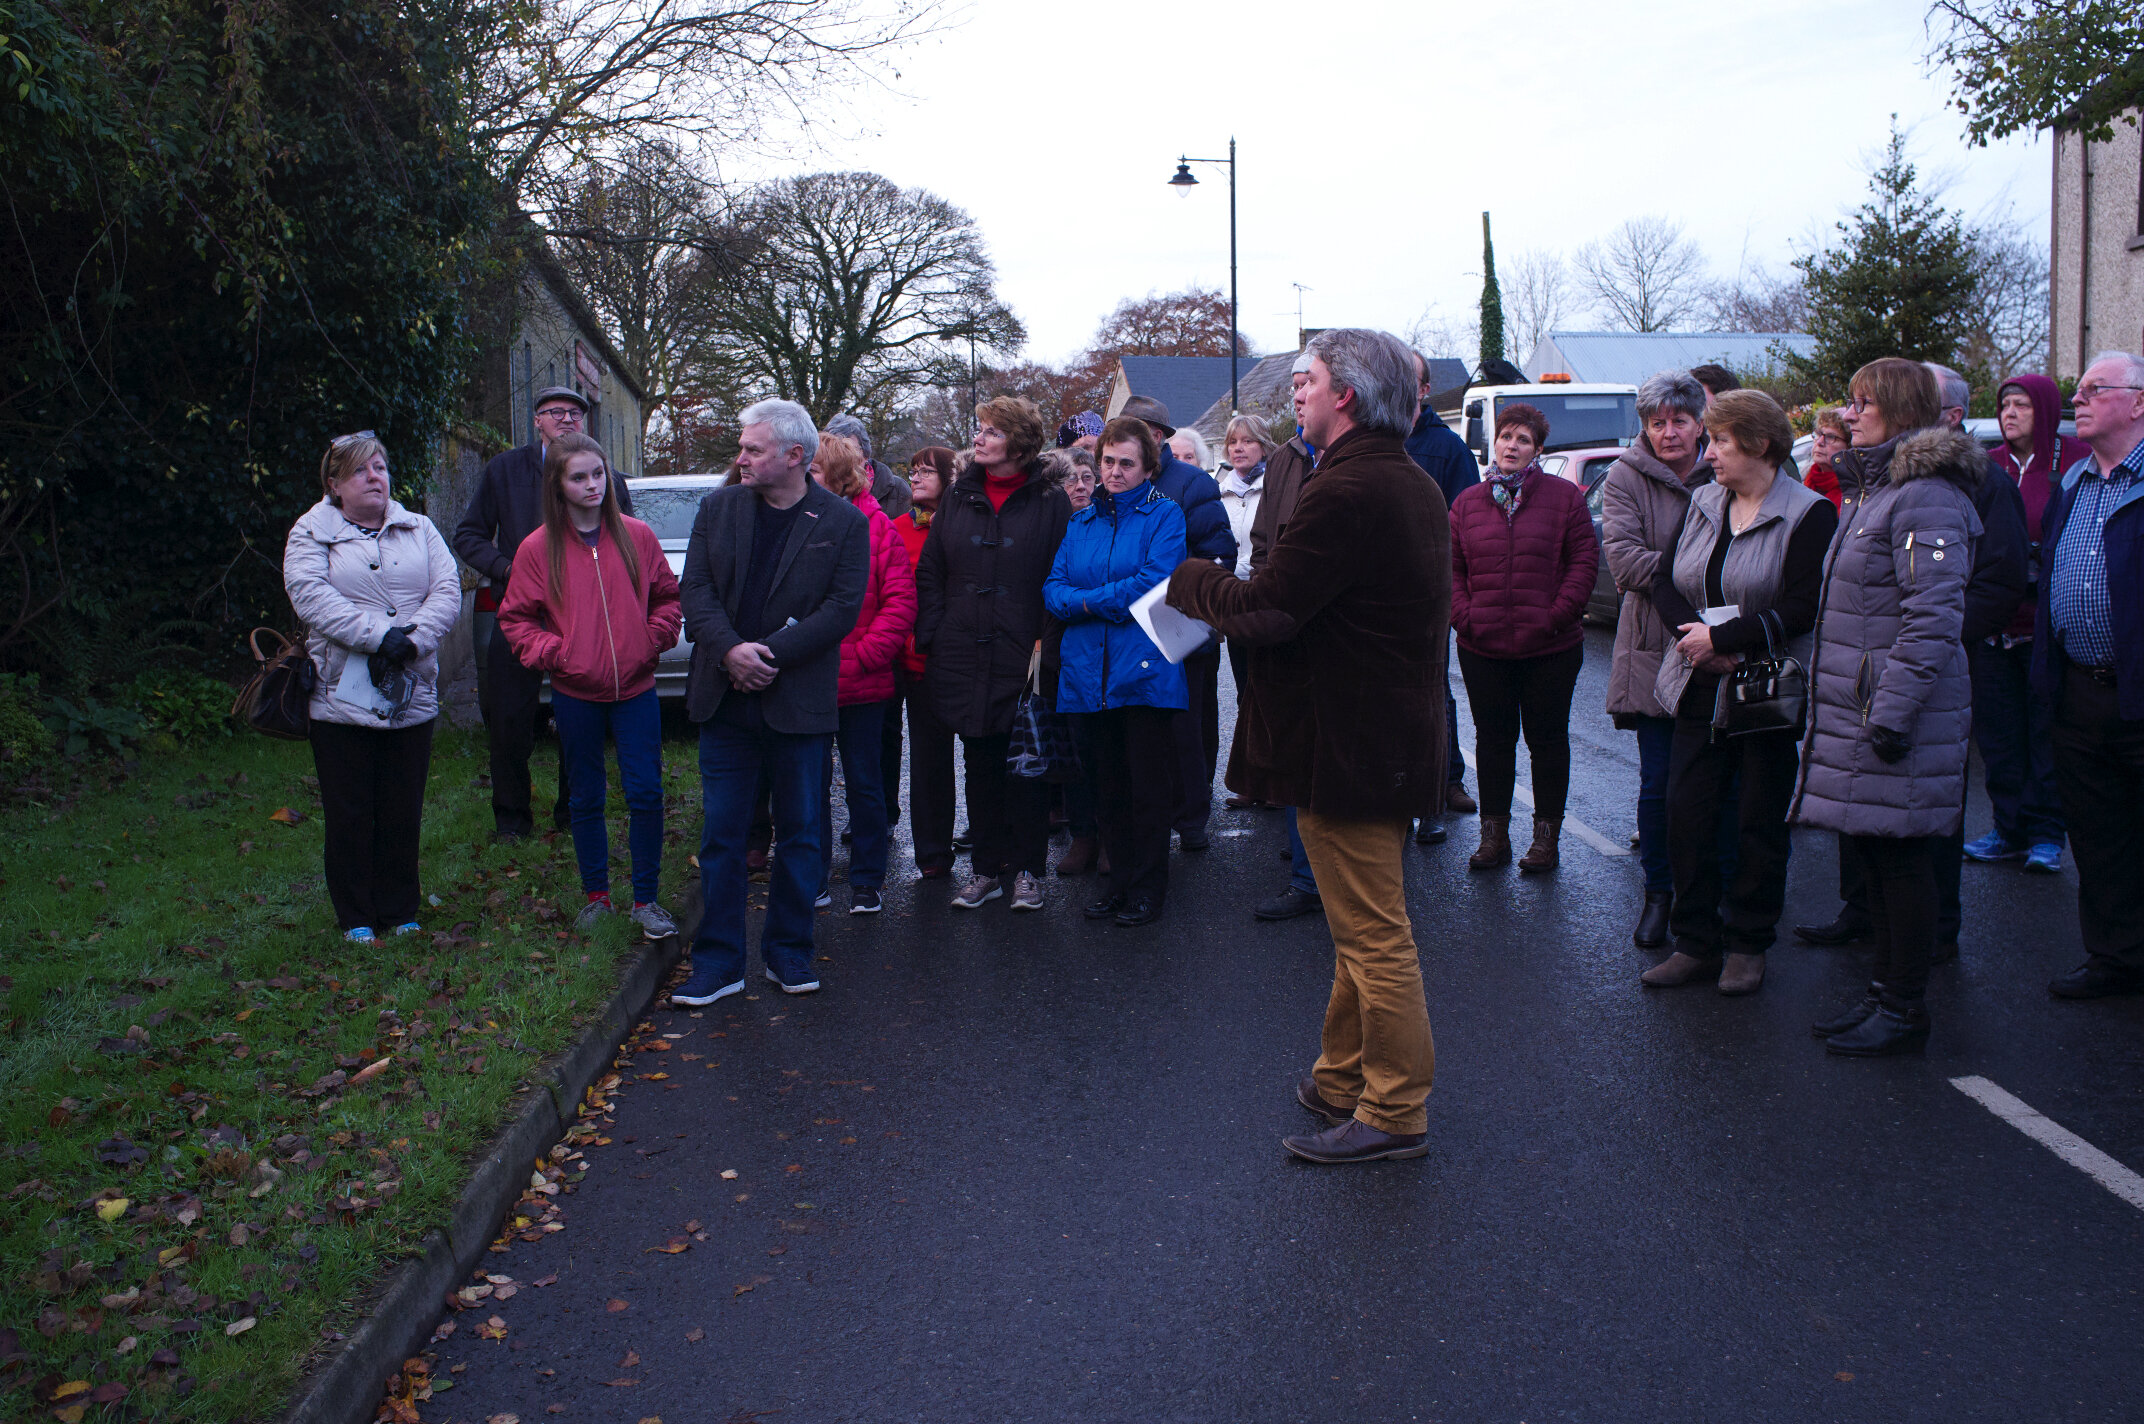  Architectural historian Kevin V. Mulligan giving a walking tour of the village of Drum 